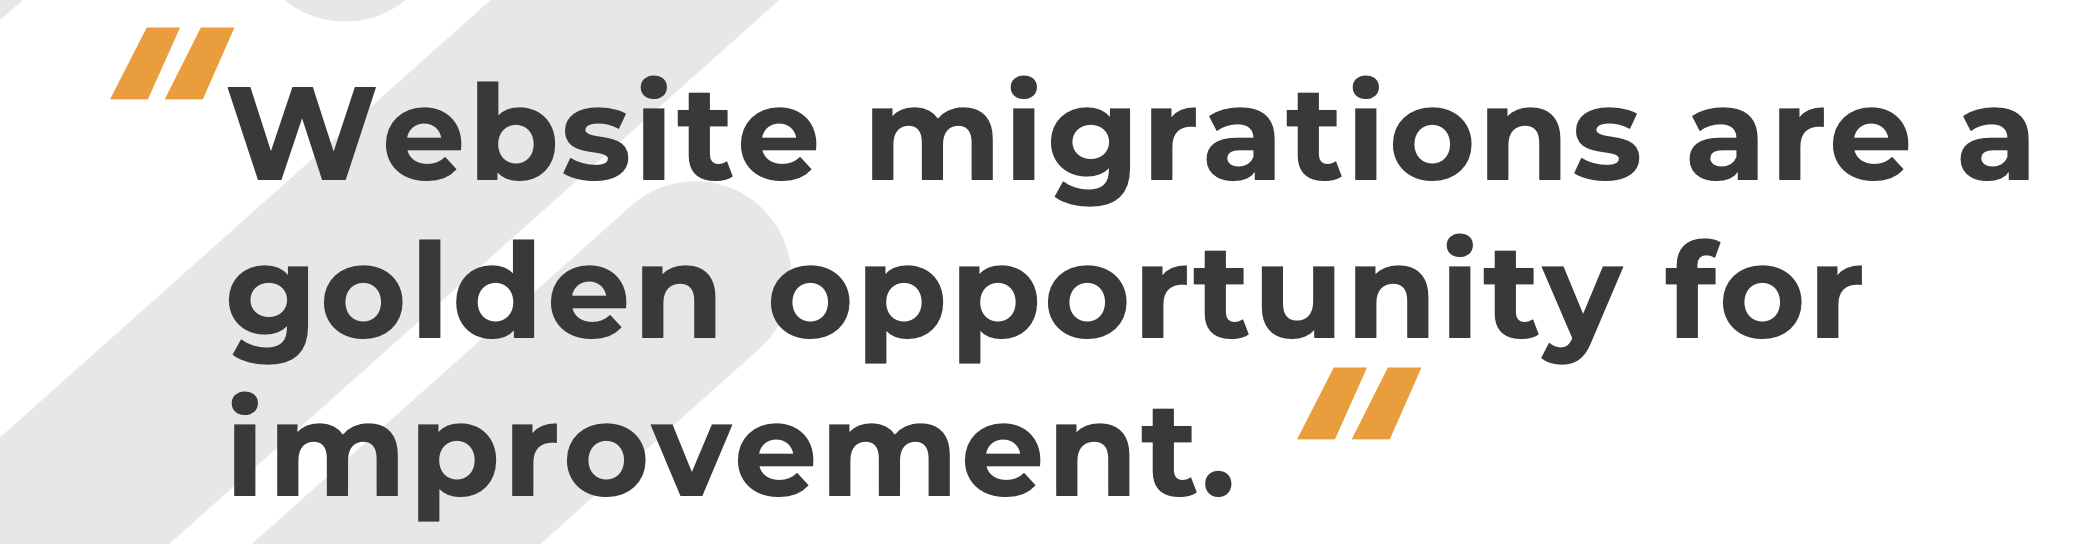 Website Migrations are an Opportunity for Improvement